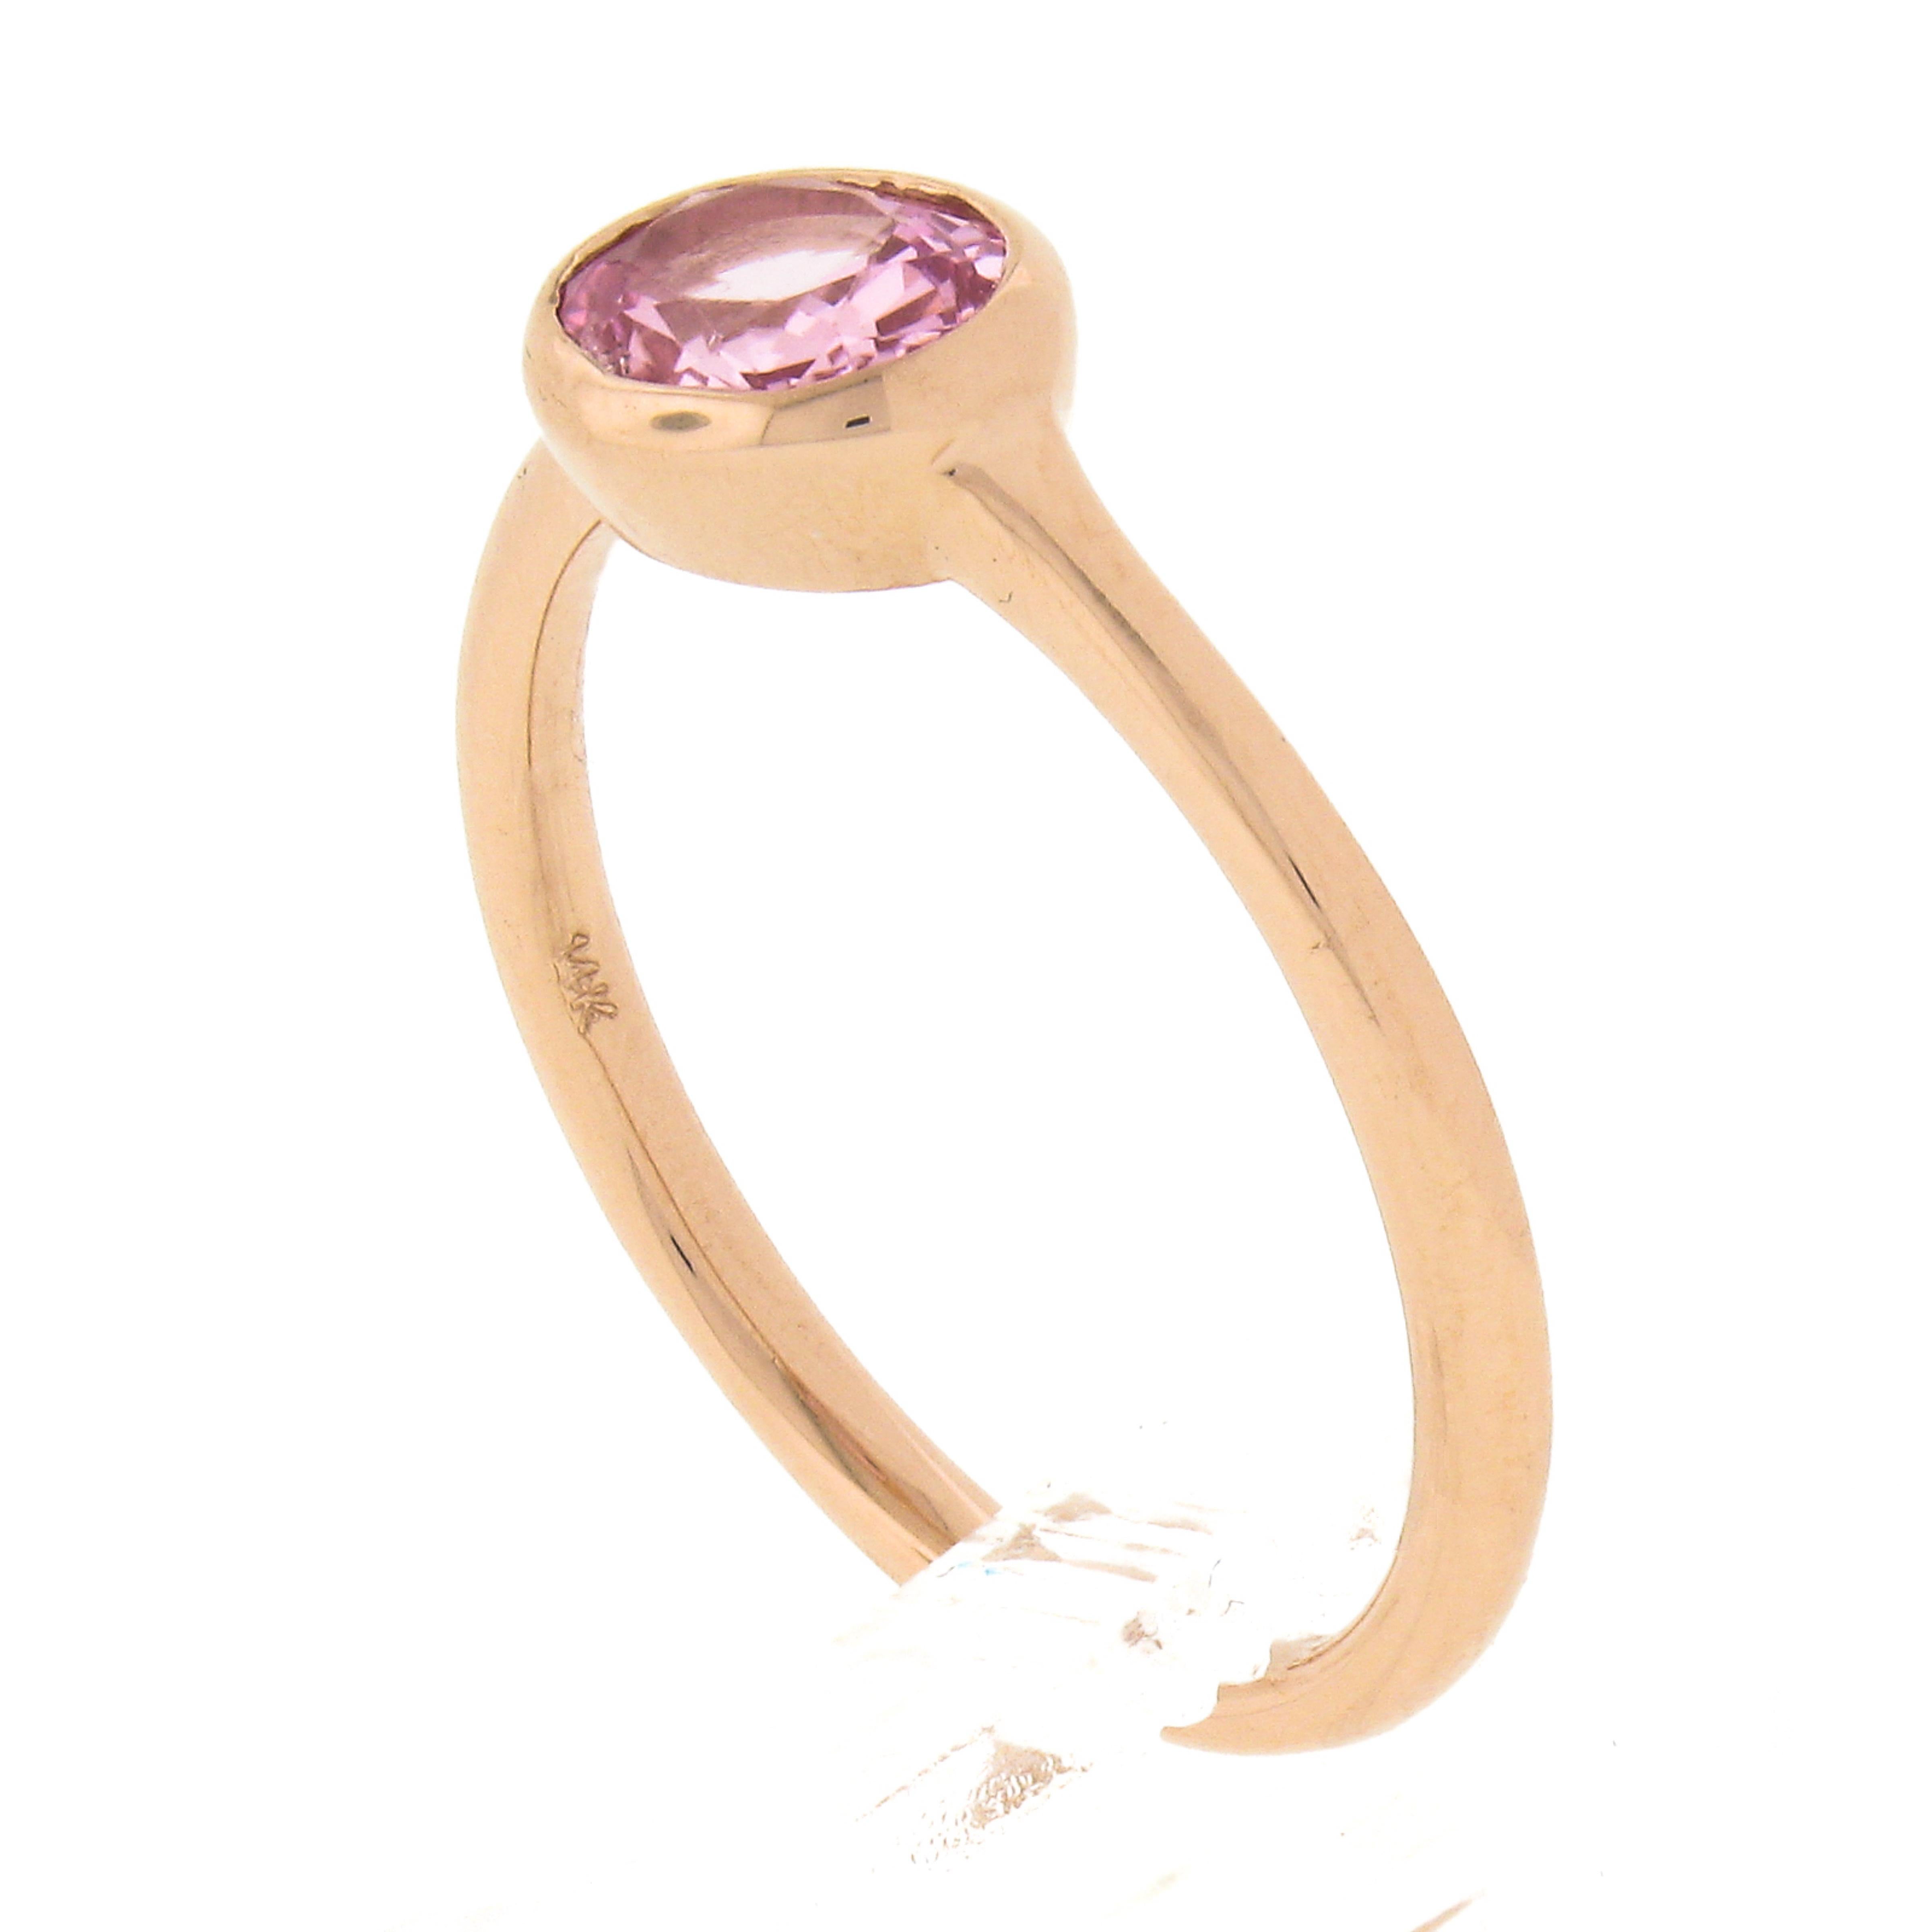 NEW 14k Rose Gold 1.29ctw GIA Oval Orangy Pink Sapphire Bezel Solitaire Ring en vente 5